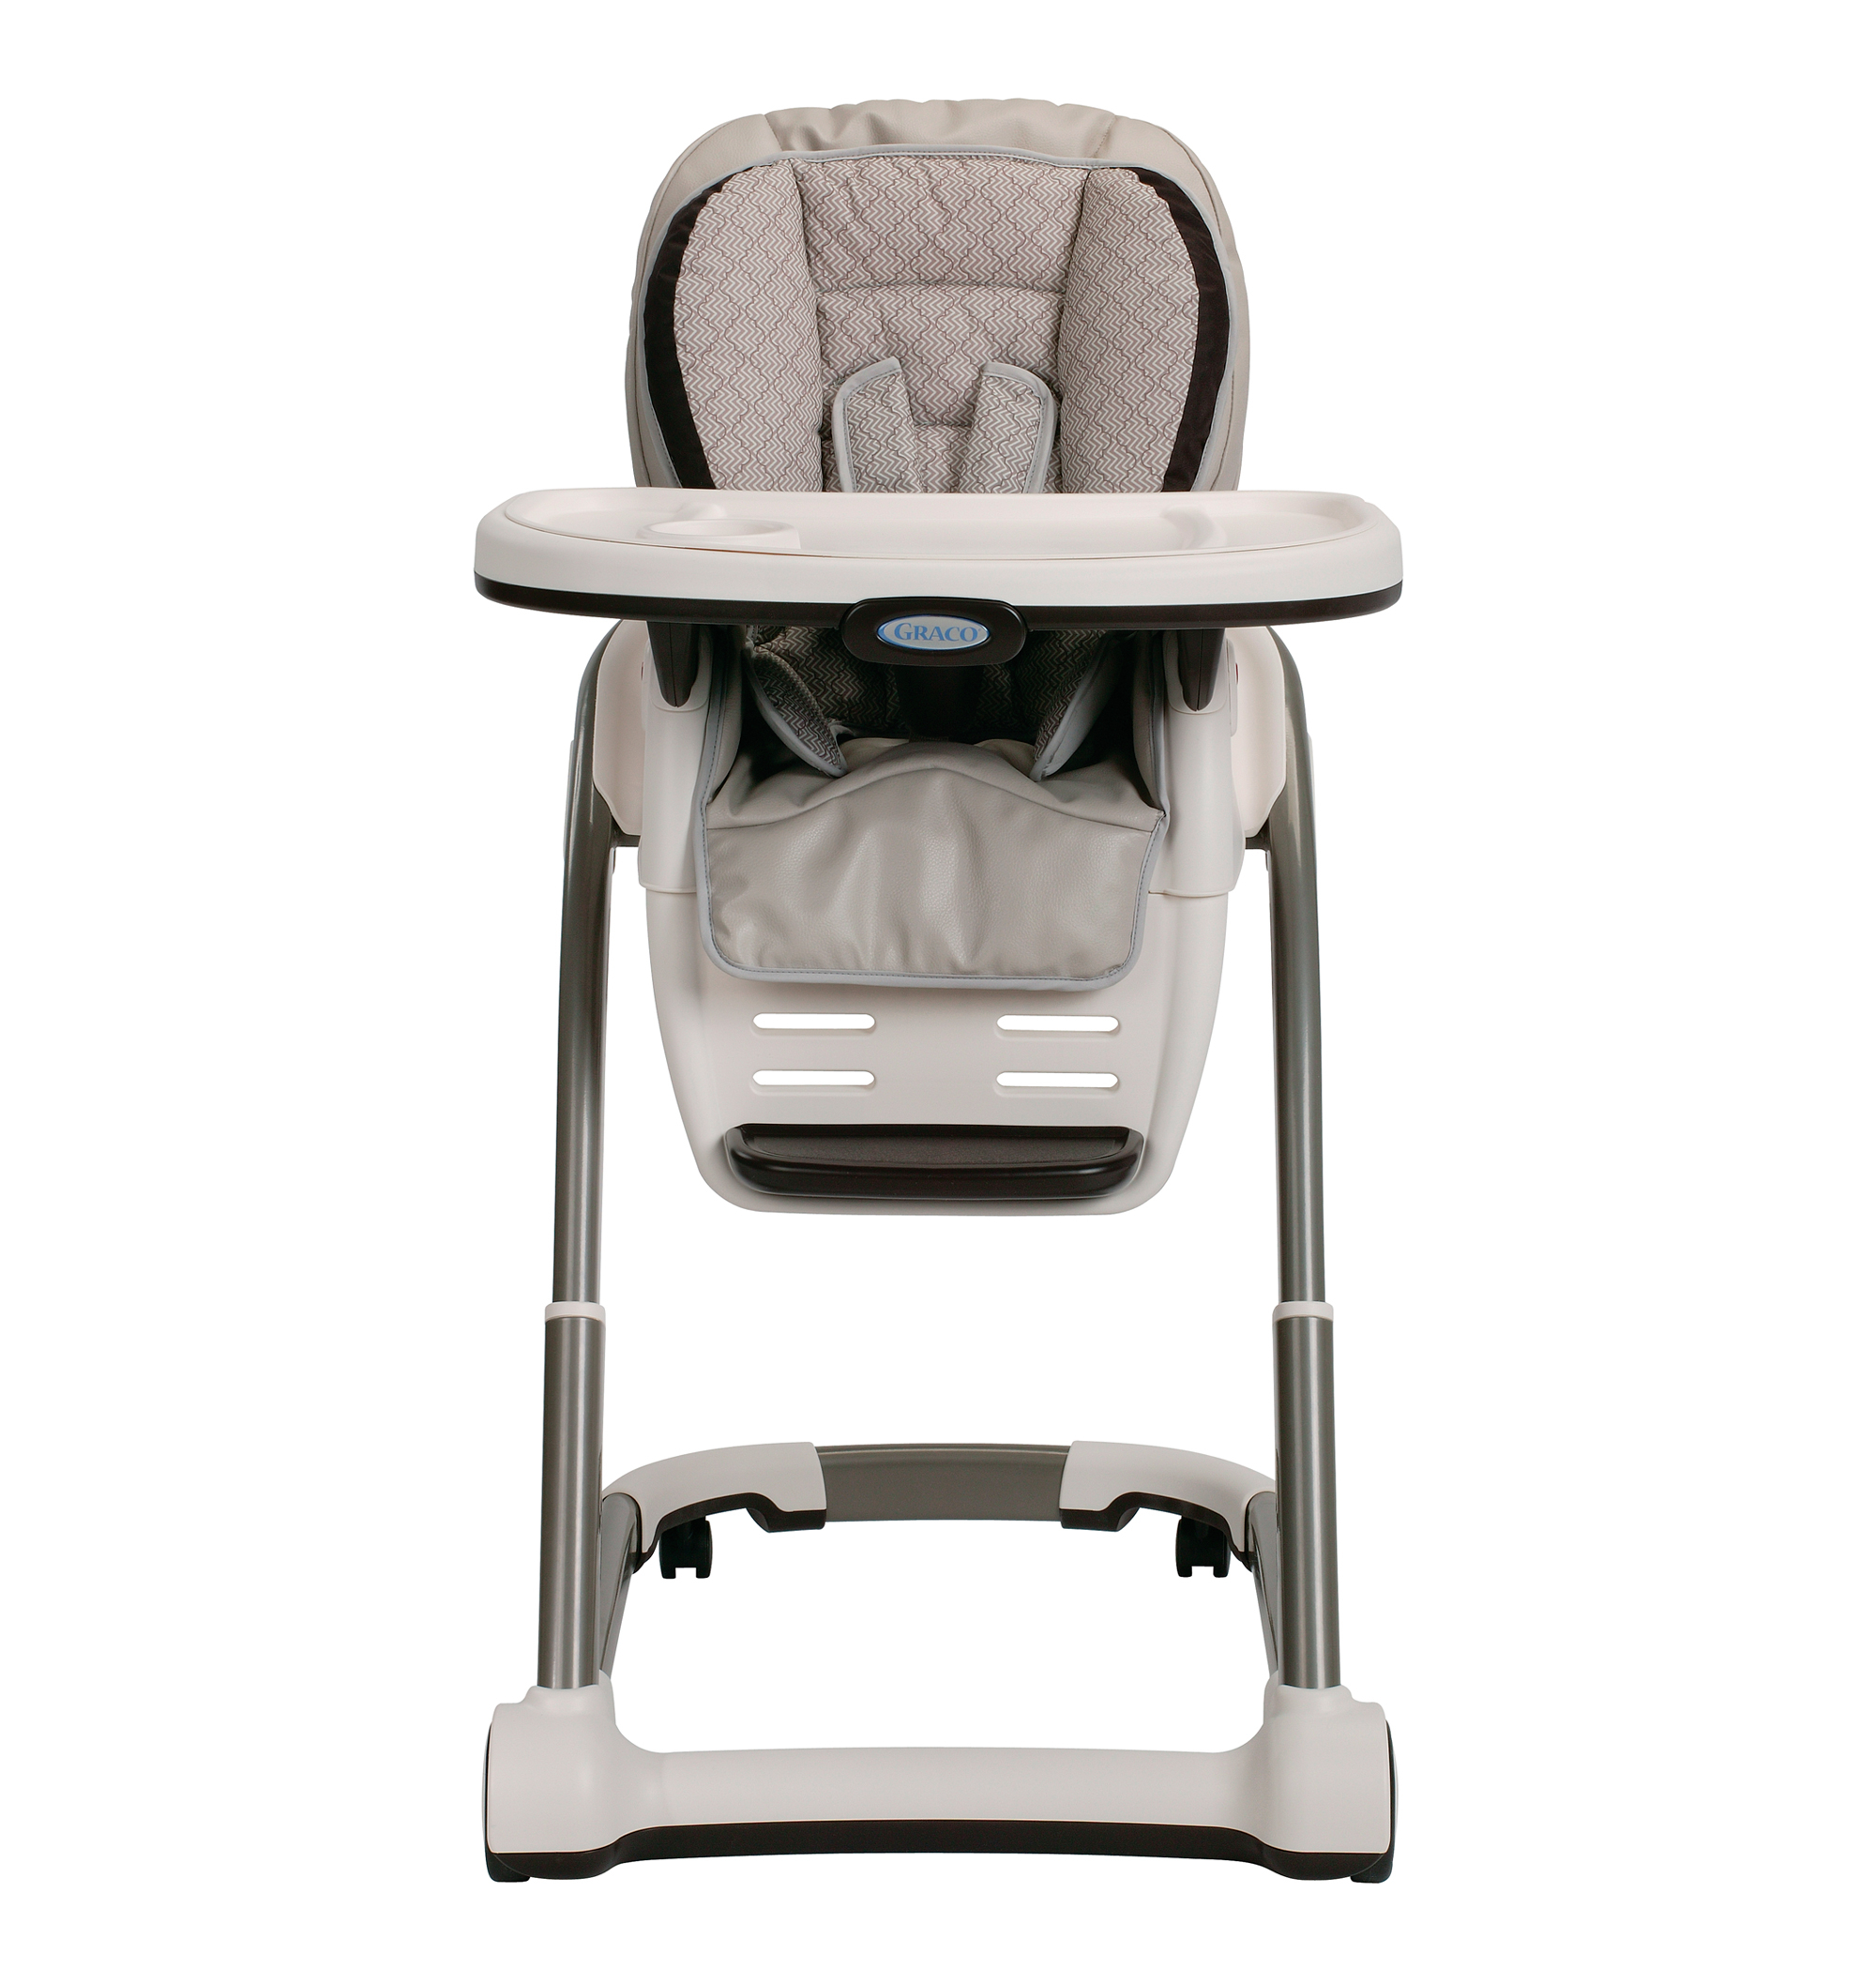 The Best High Chairs of 2016